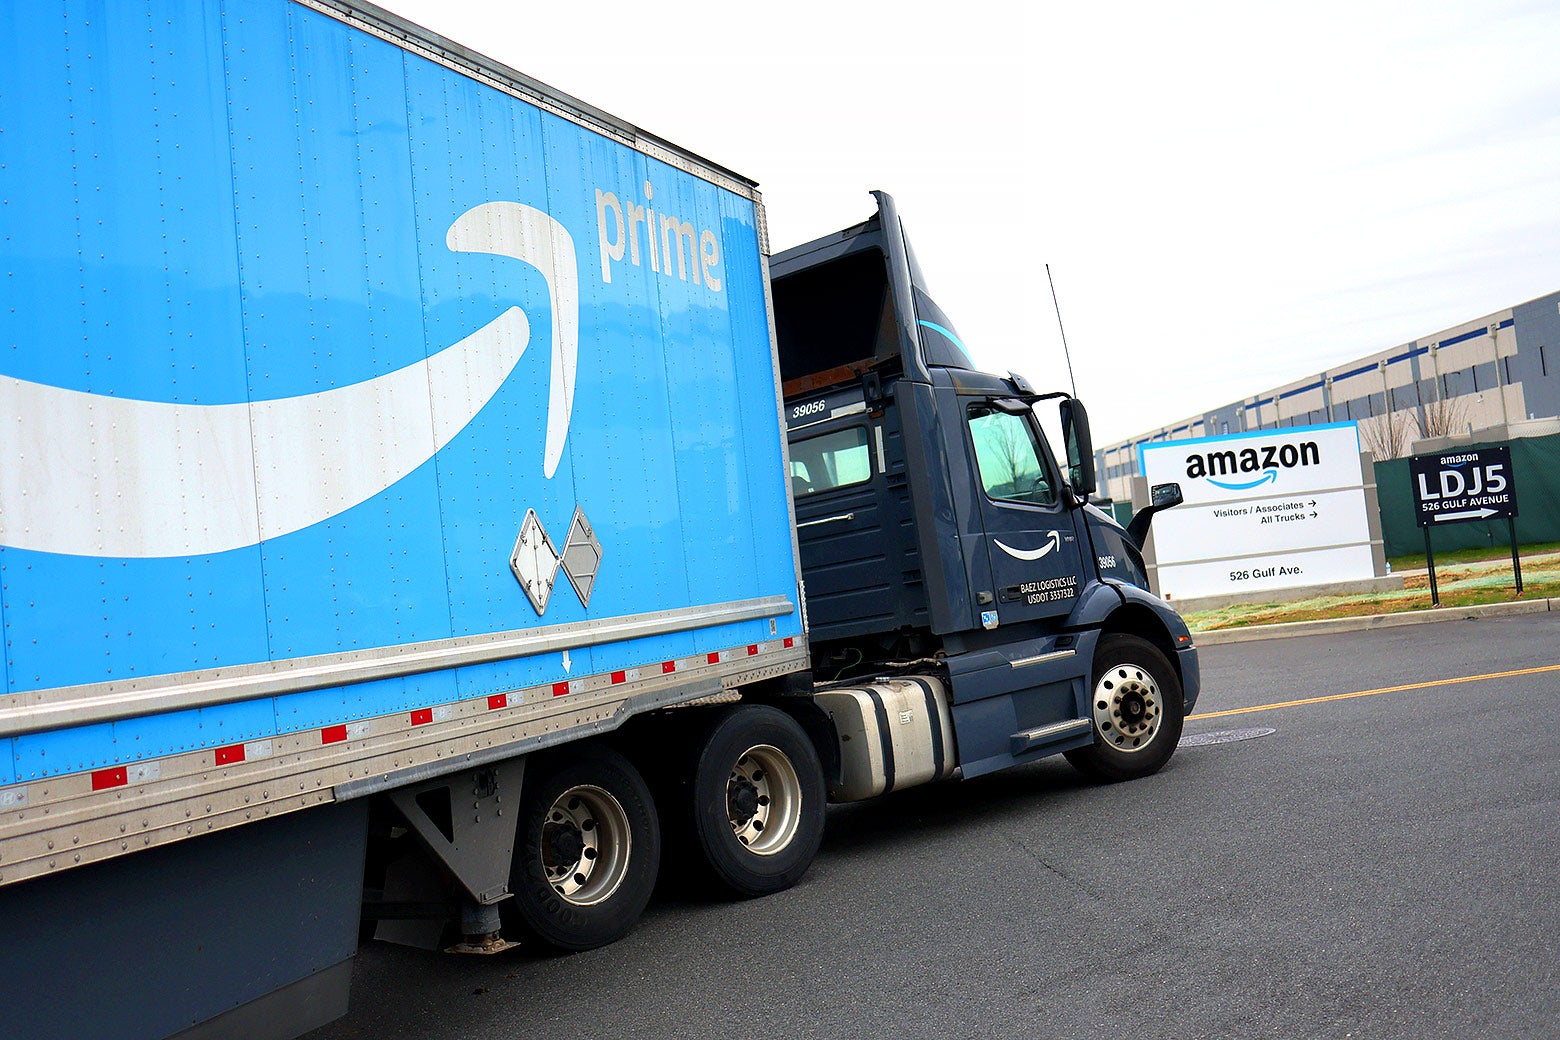 The Federal Government Says Amazon ‘Duped Millions of Consumers’